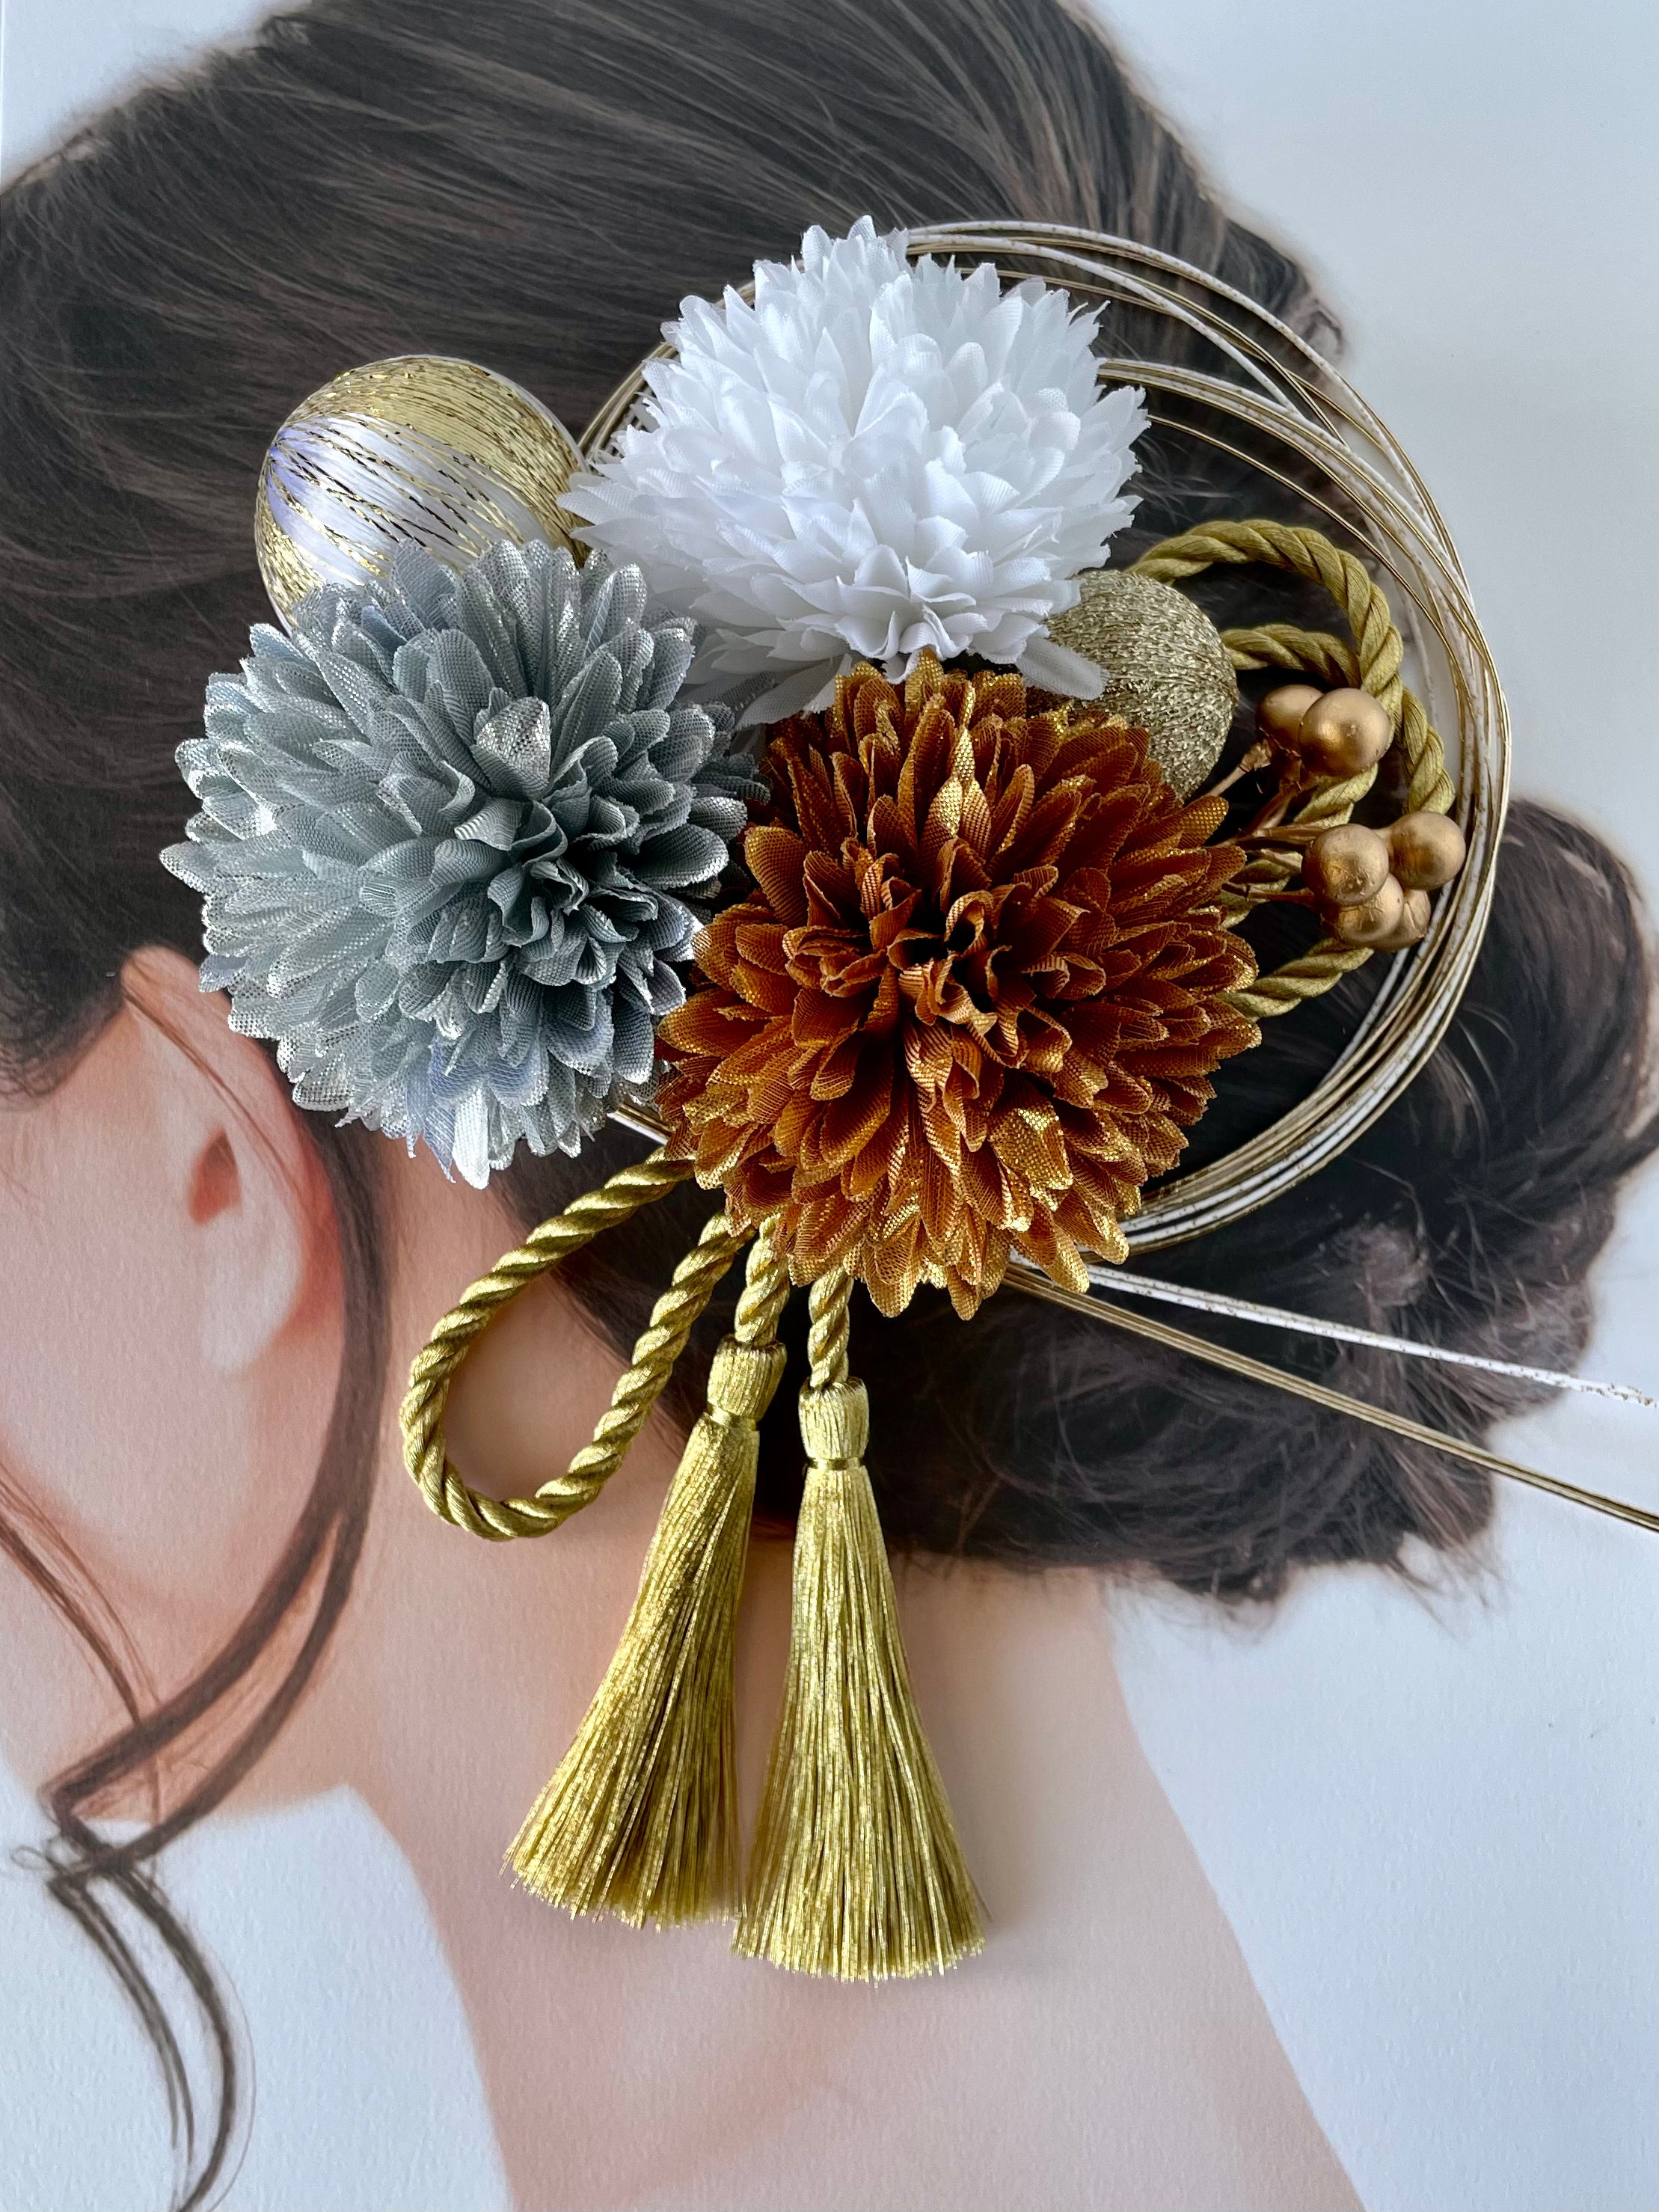 9㎝size 〜clear cool flower hair clip〜 - その他